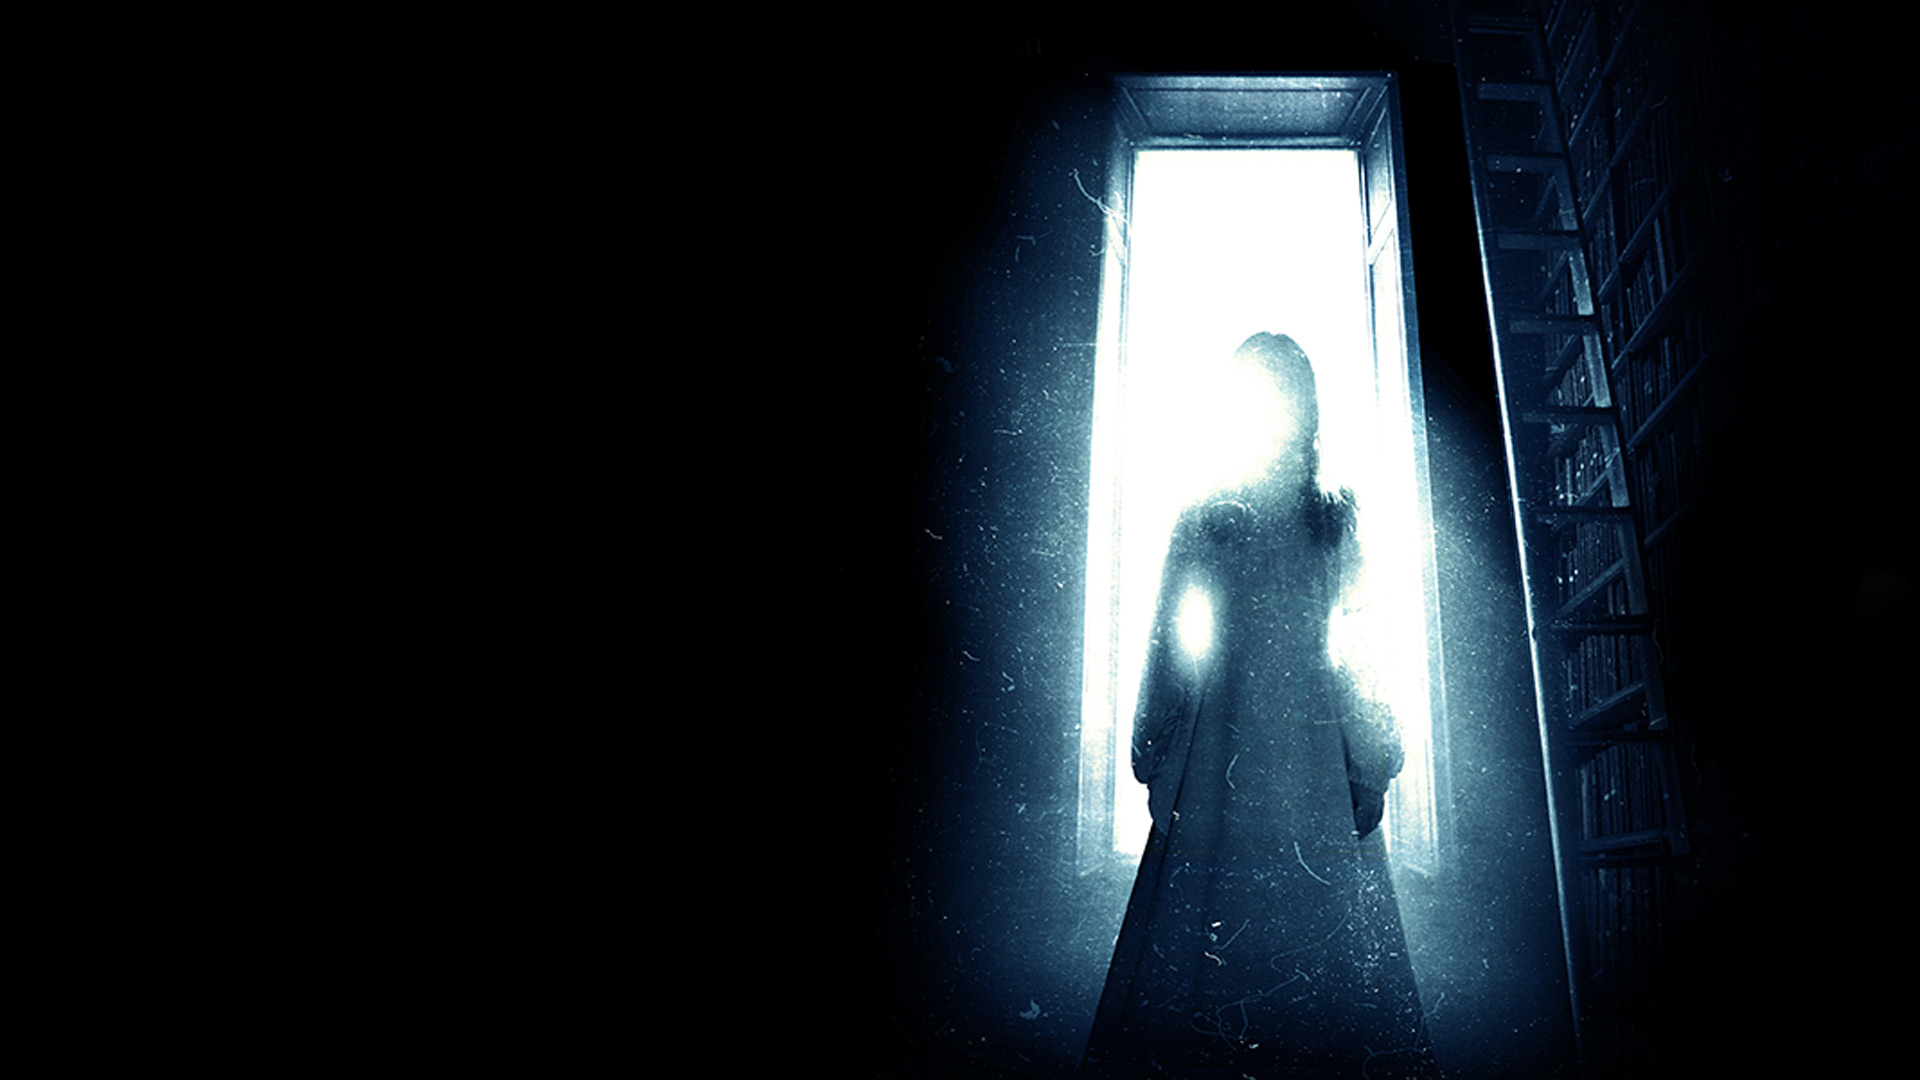 A shadowy figure stands in a doorway in the promotional image for The Haunting play